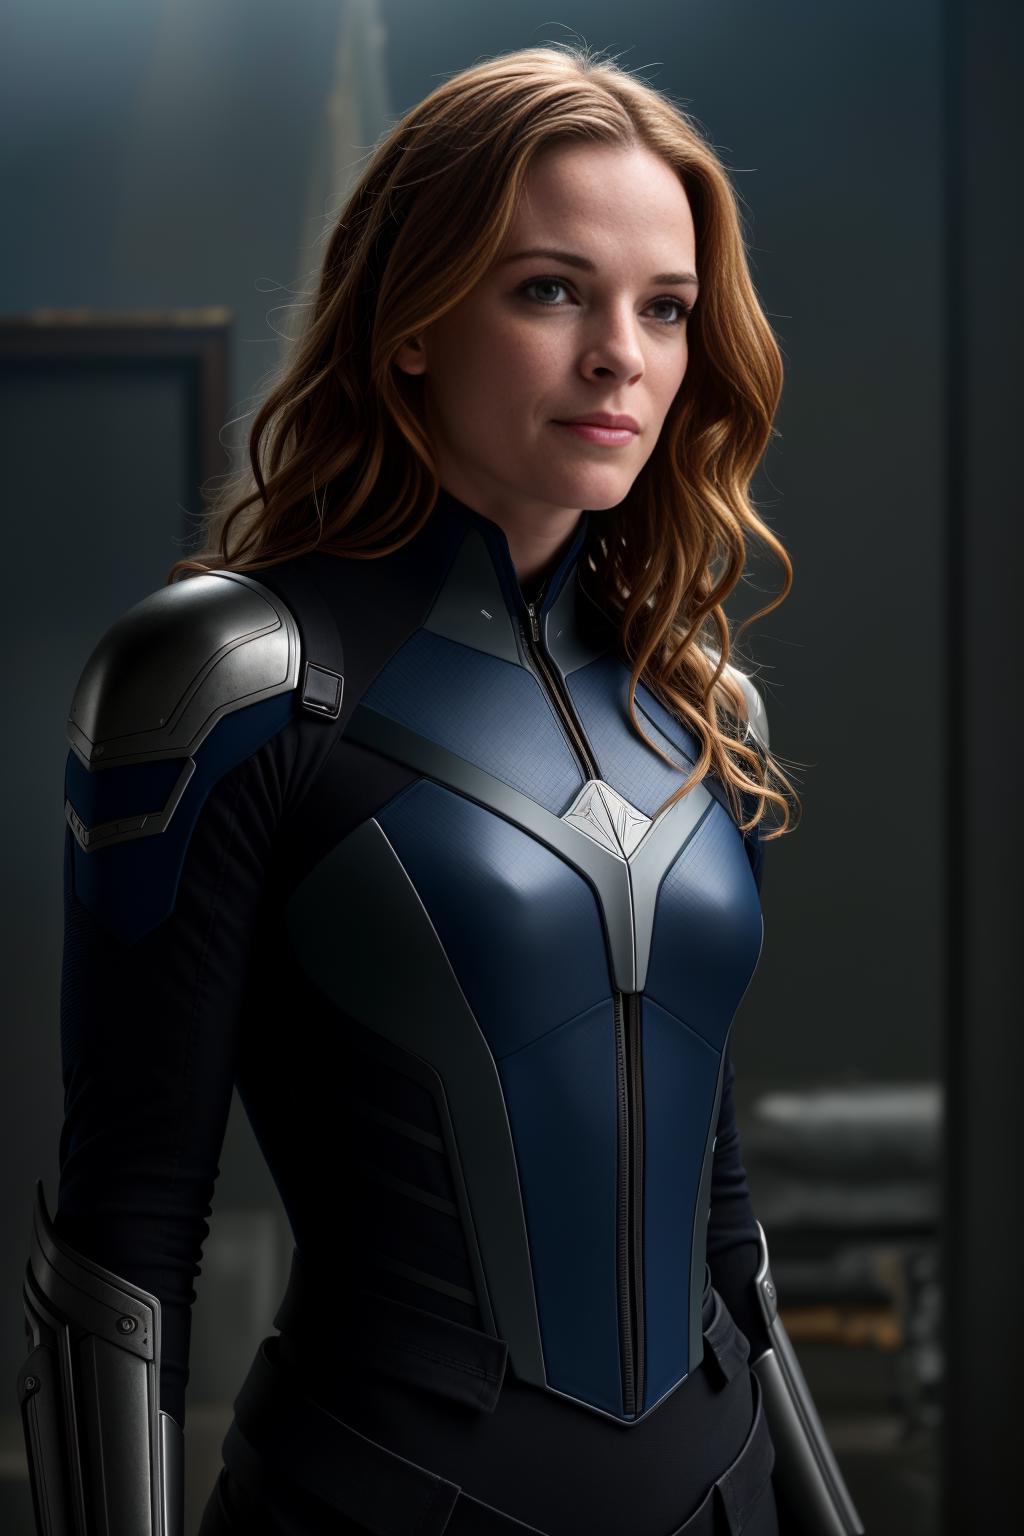 Danielle Panabaker (The Flash TV Show) image by Zorglub